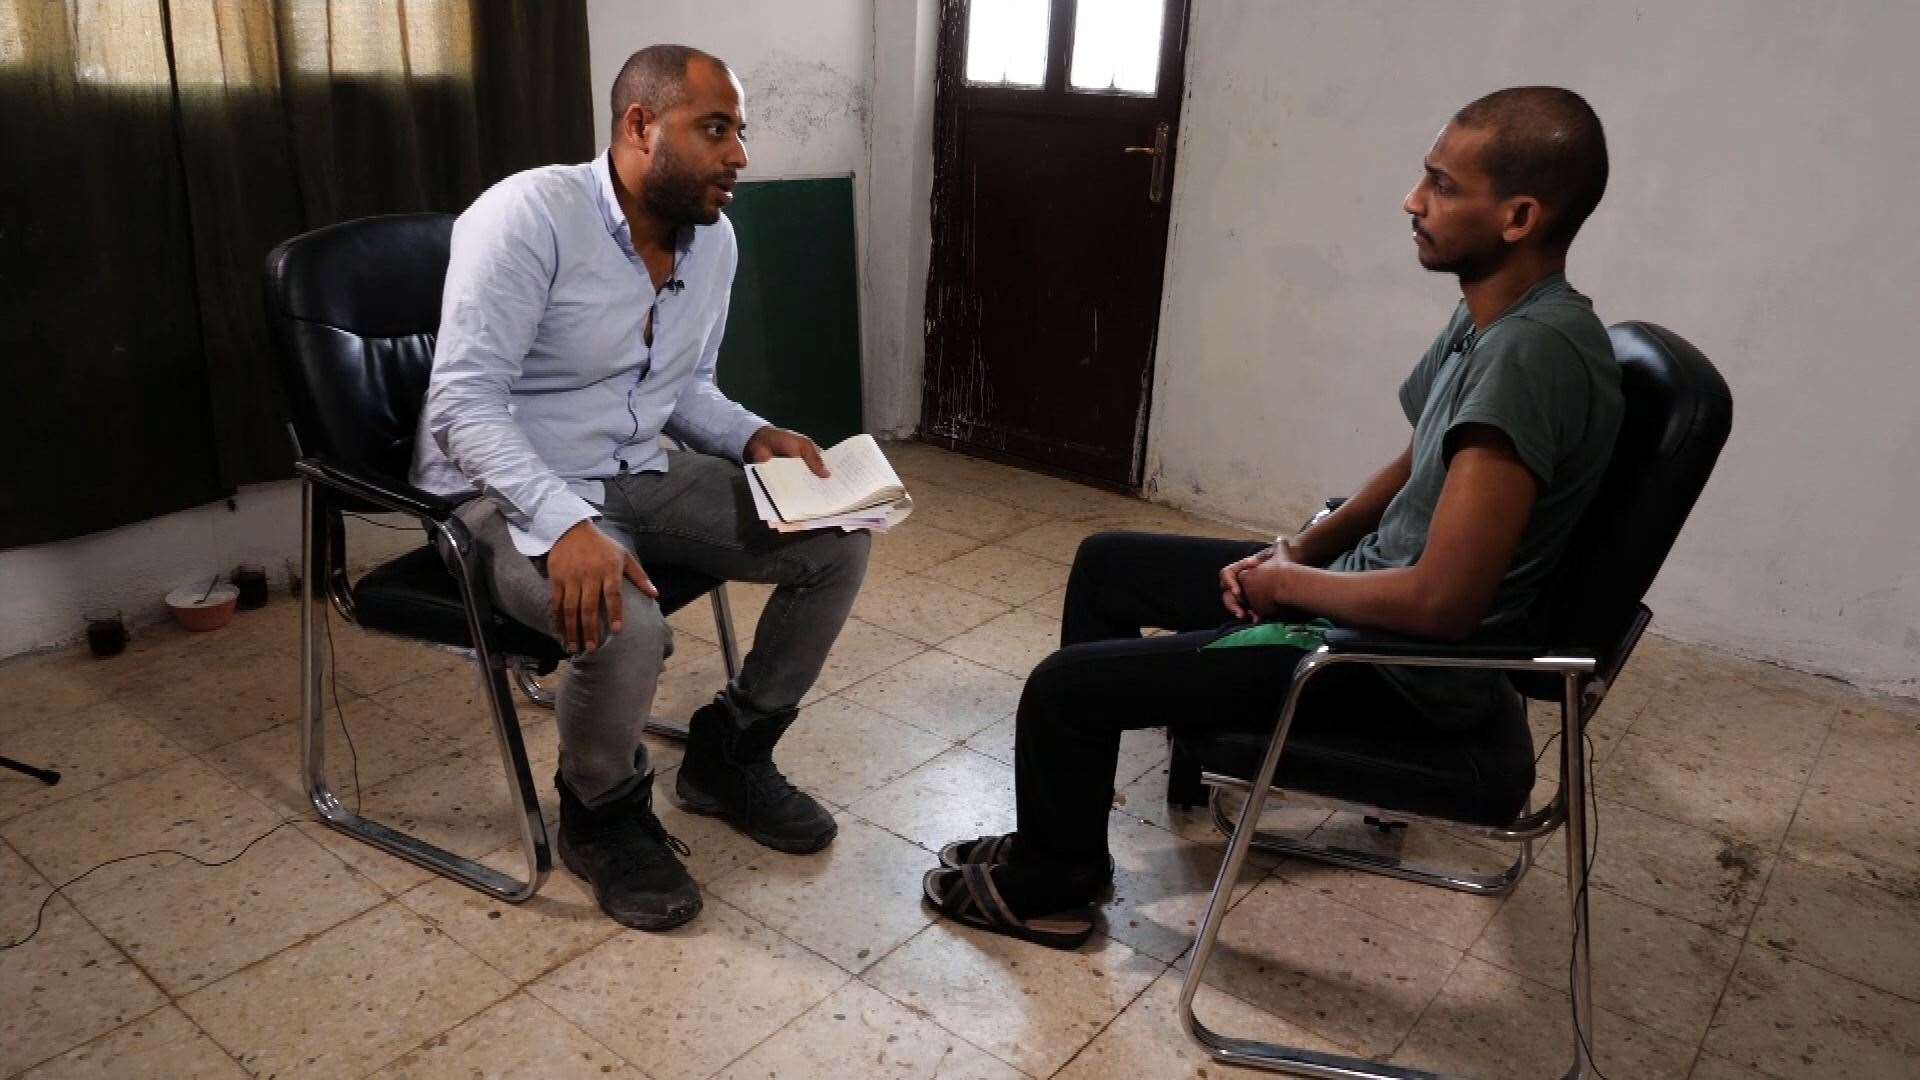 ITV News Security Editor Rohit Kachroo (left) speaking to El Shafee Elsheikh (right) (ITV News/PA)